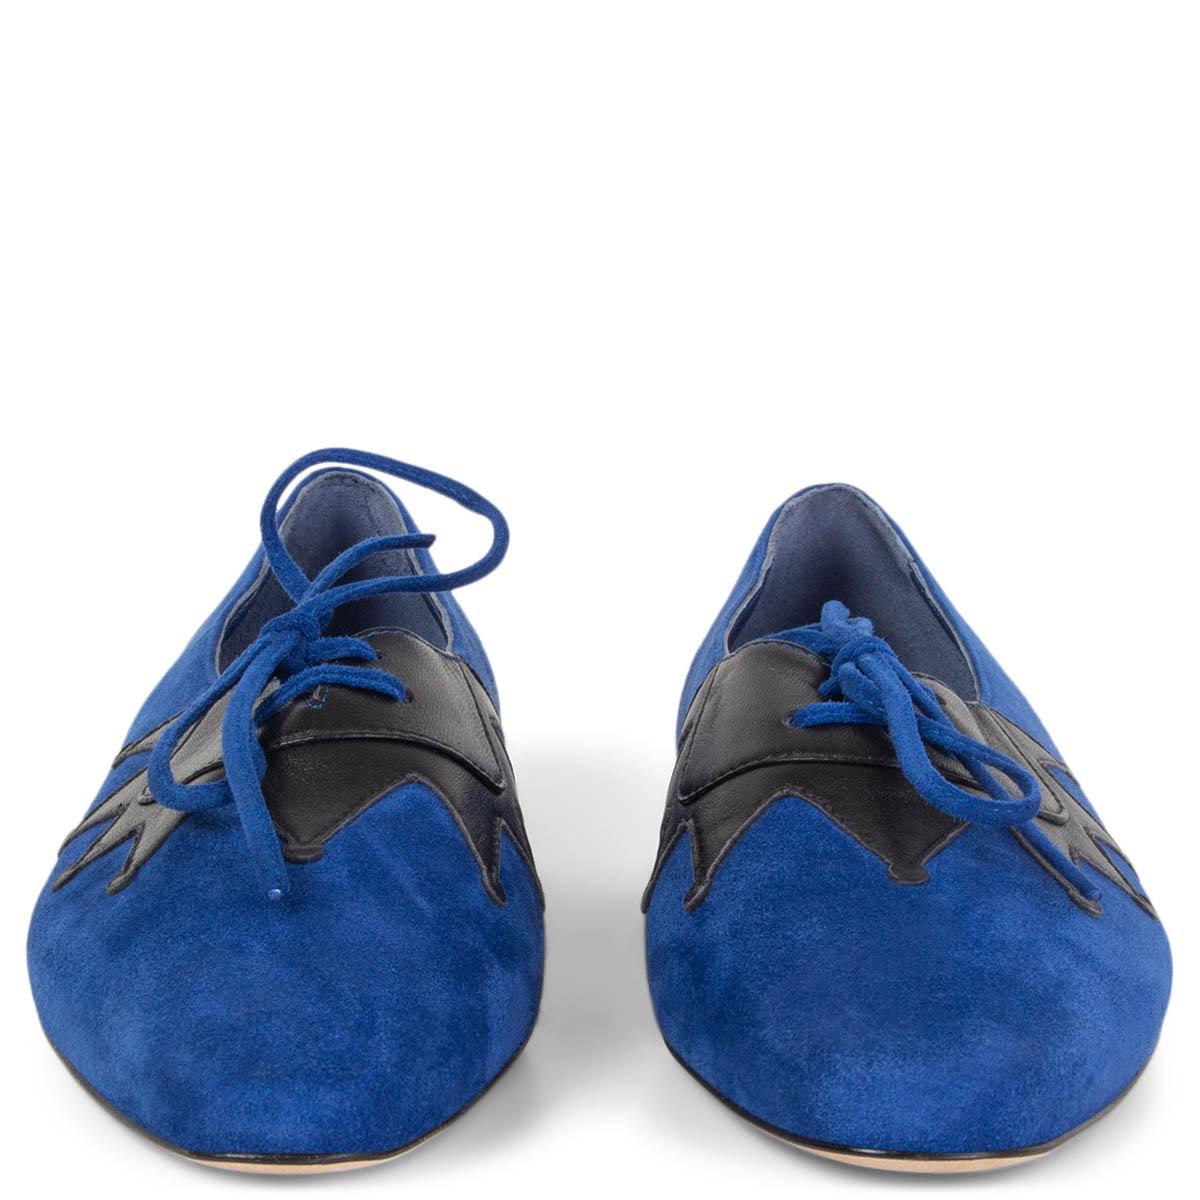 100% authentic Manolo Blahnik Harlekin pointed-toe Oxford style shoes in royal blue suede and black calfskin. Brand new. 

Measurements
Imprinted Size	36.5
Shoe Size	36.5
Inside Sole	24cm (9.4in)
Width	7cm (2.7in)
Heel	1cm (0.4in)

All our listings